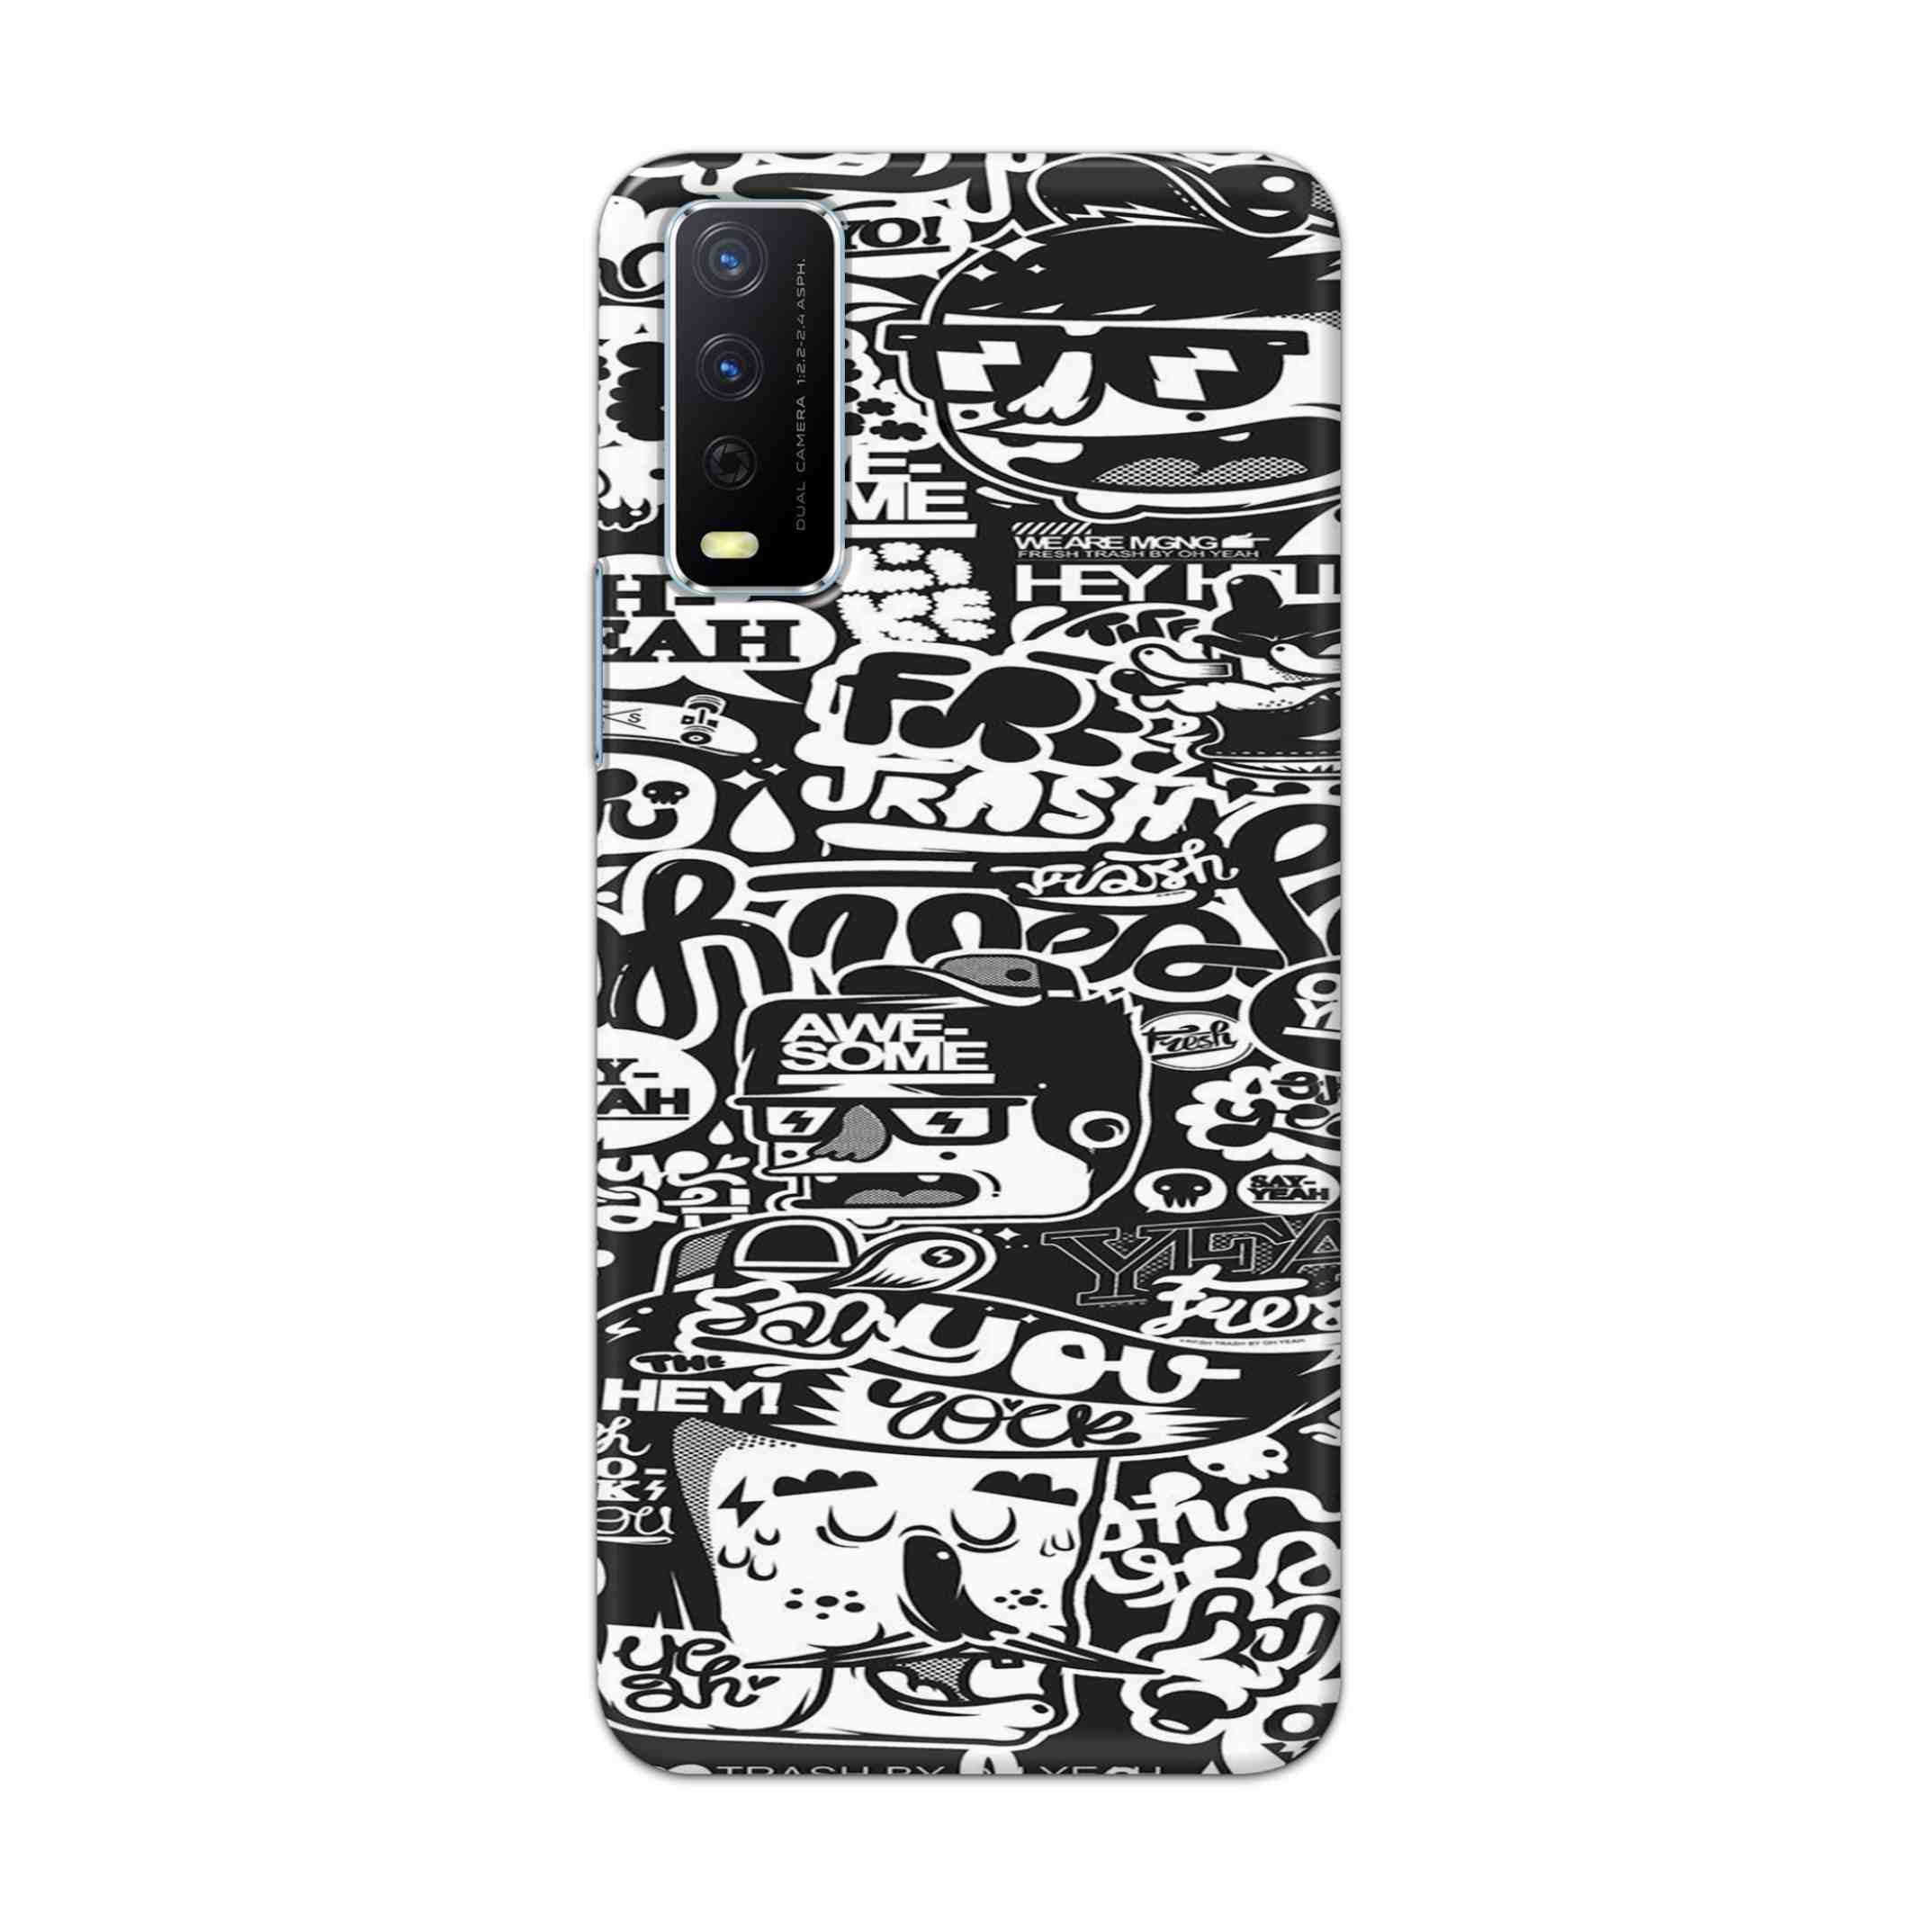 Buy Awesome Hard Back Mobile Phone Case Cover For Vivo Y12s Online